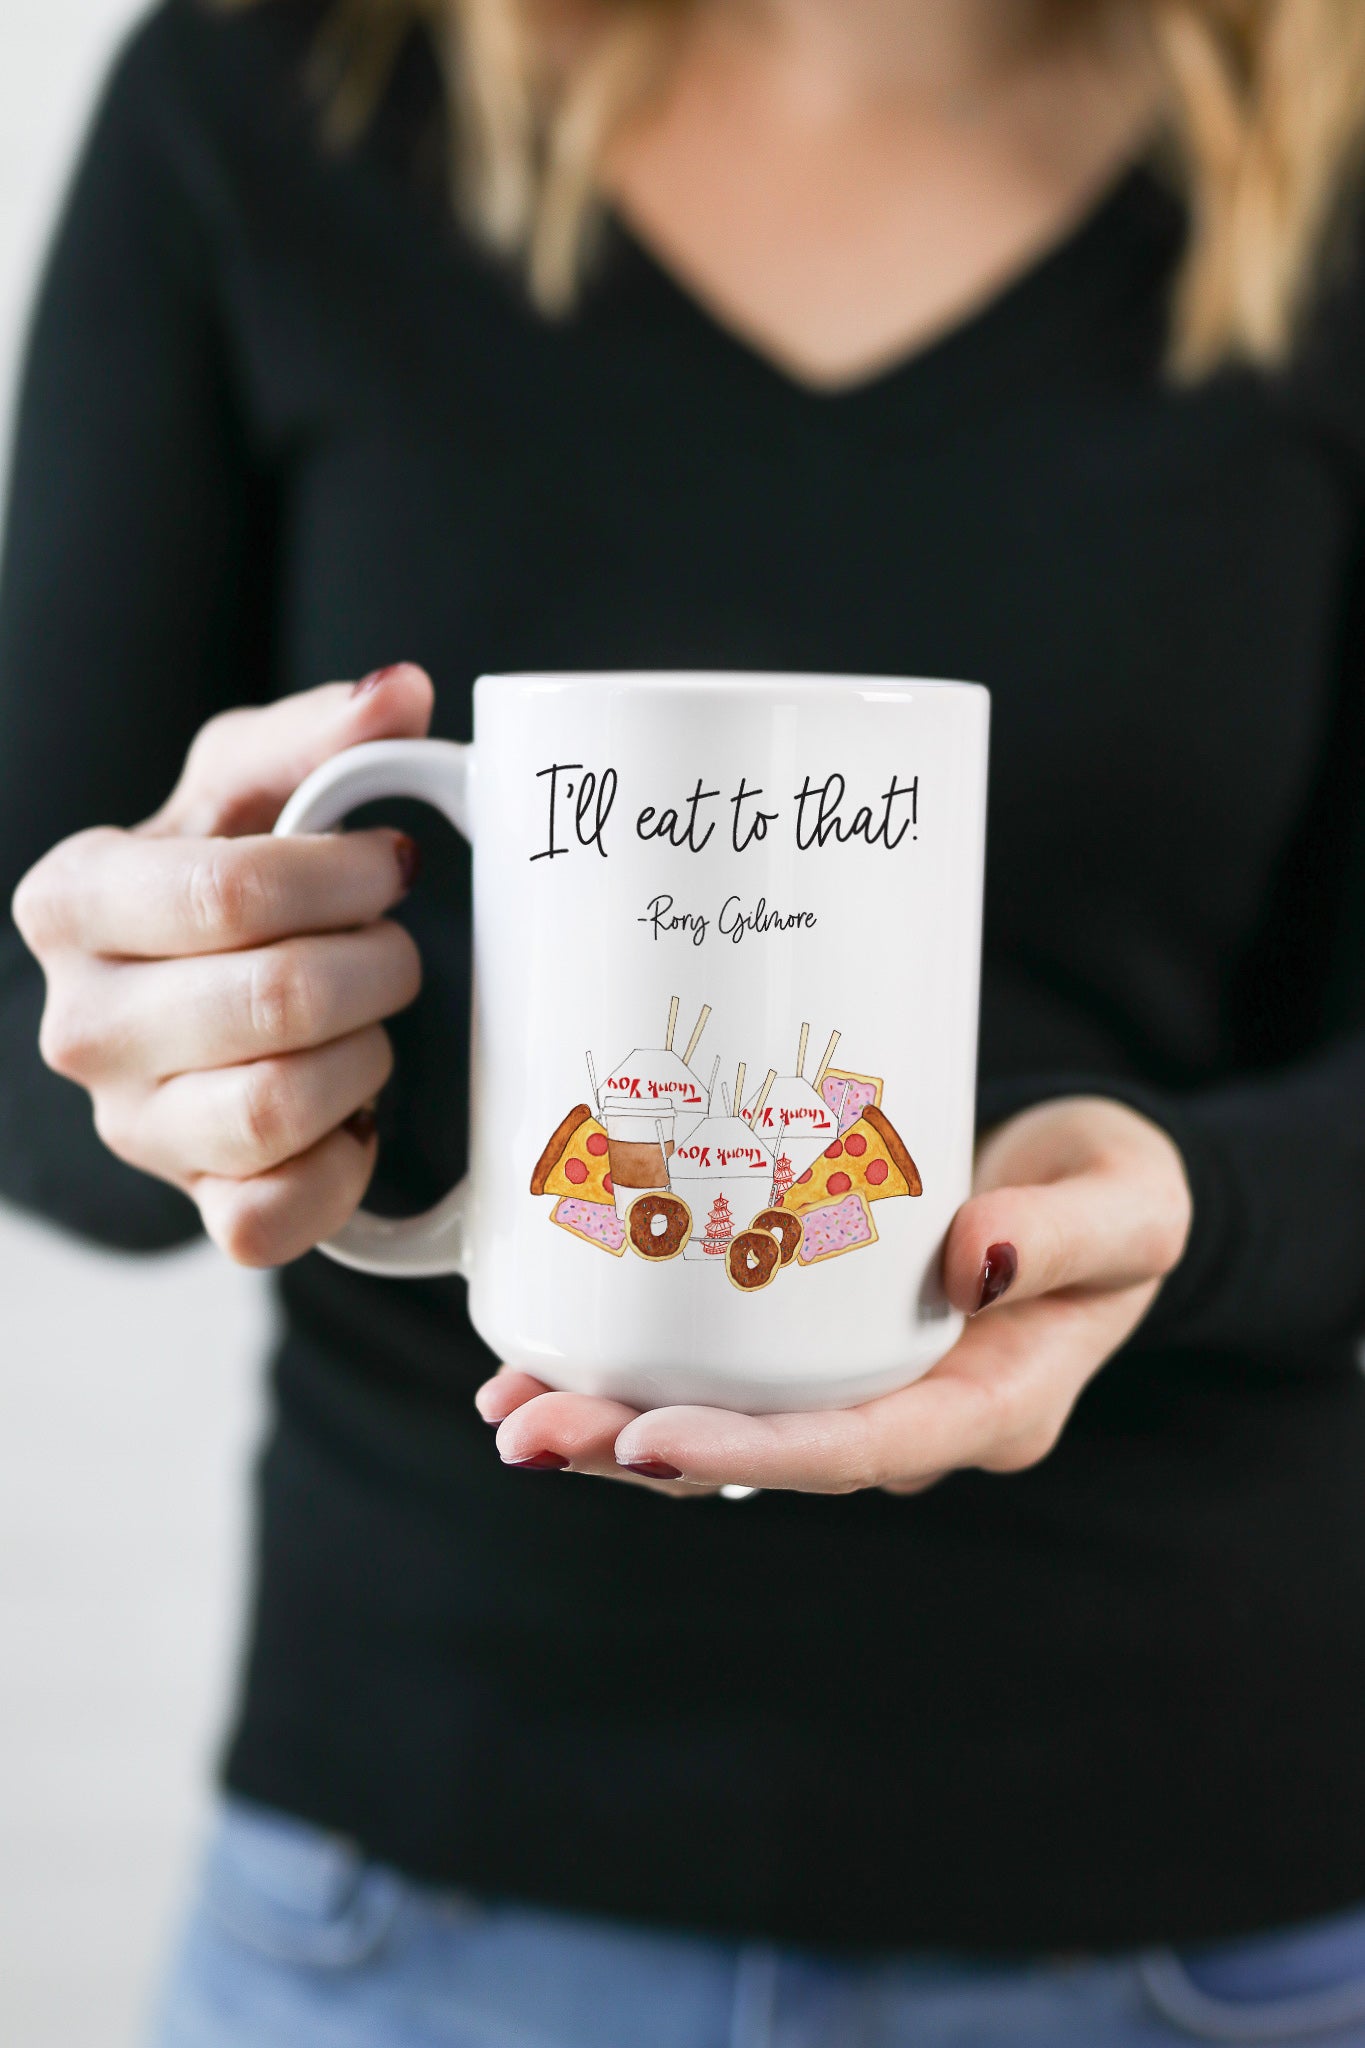 "I'll eat to that!" - Rory Gilmore  This is the perfect mug for anyone who loves all things Gilmore Girls! 